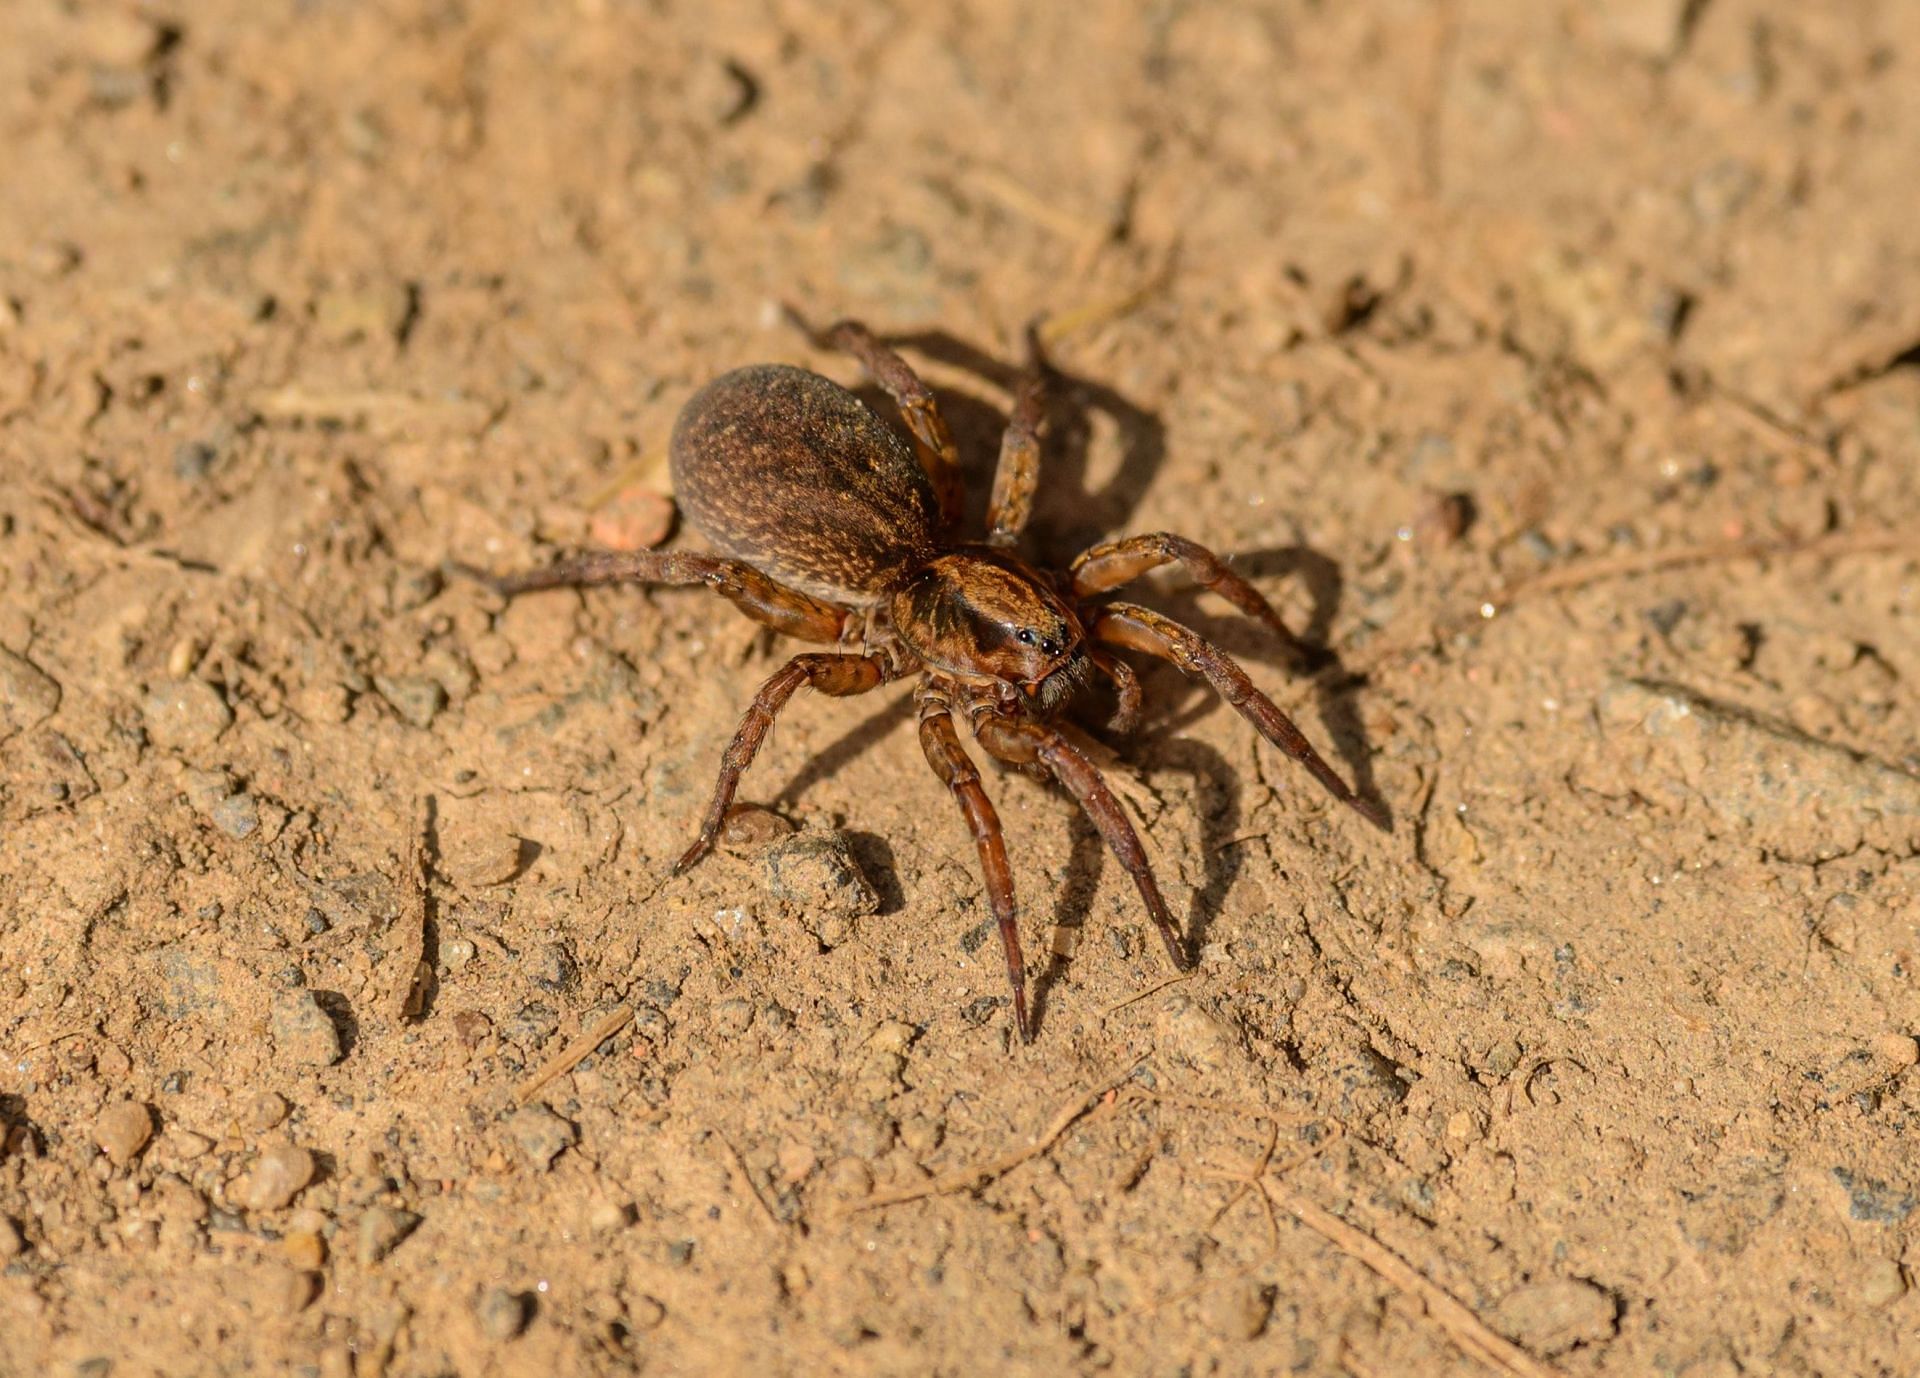 Spider bites can become severe if left untreated. (Image via Pexels/Petr Ganaj)